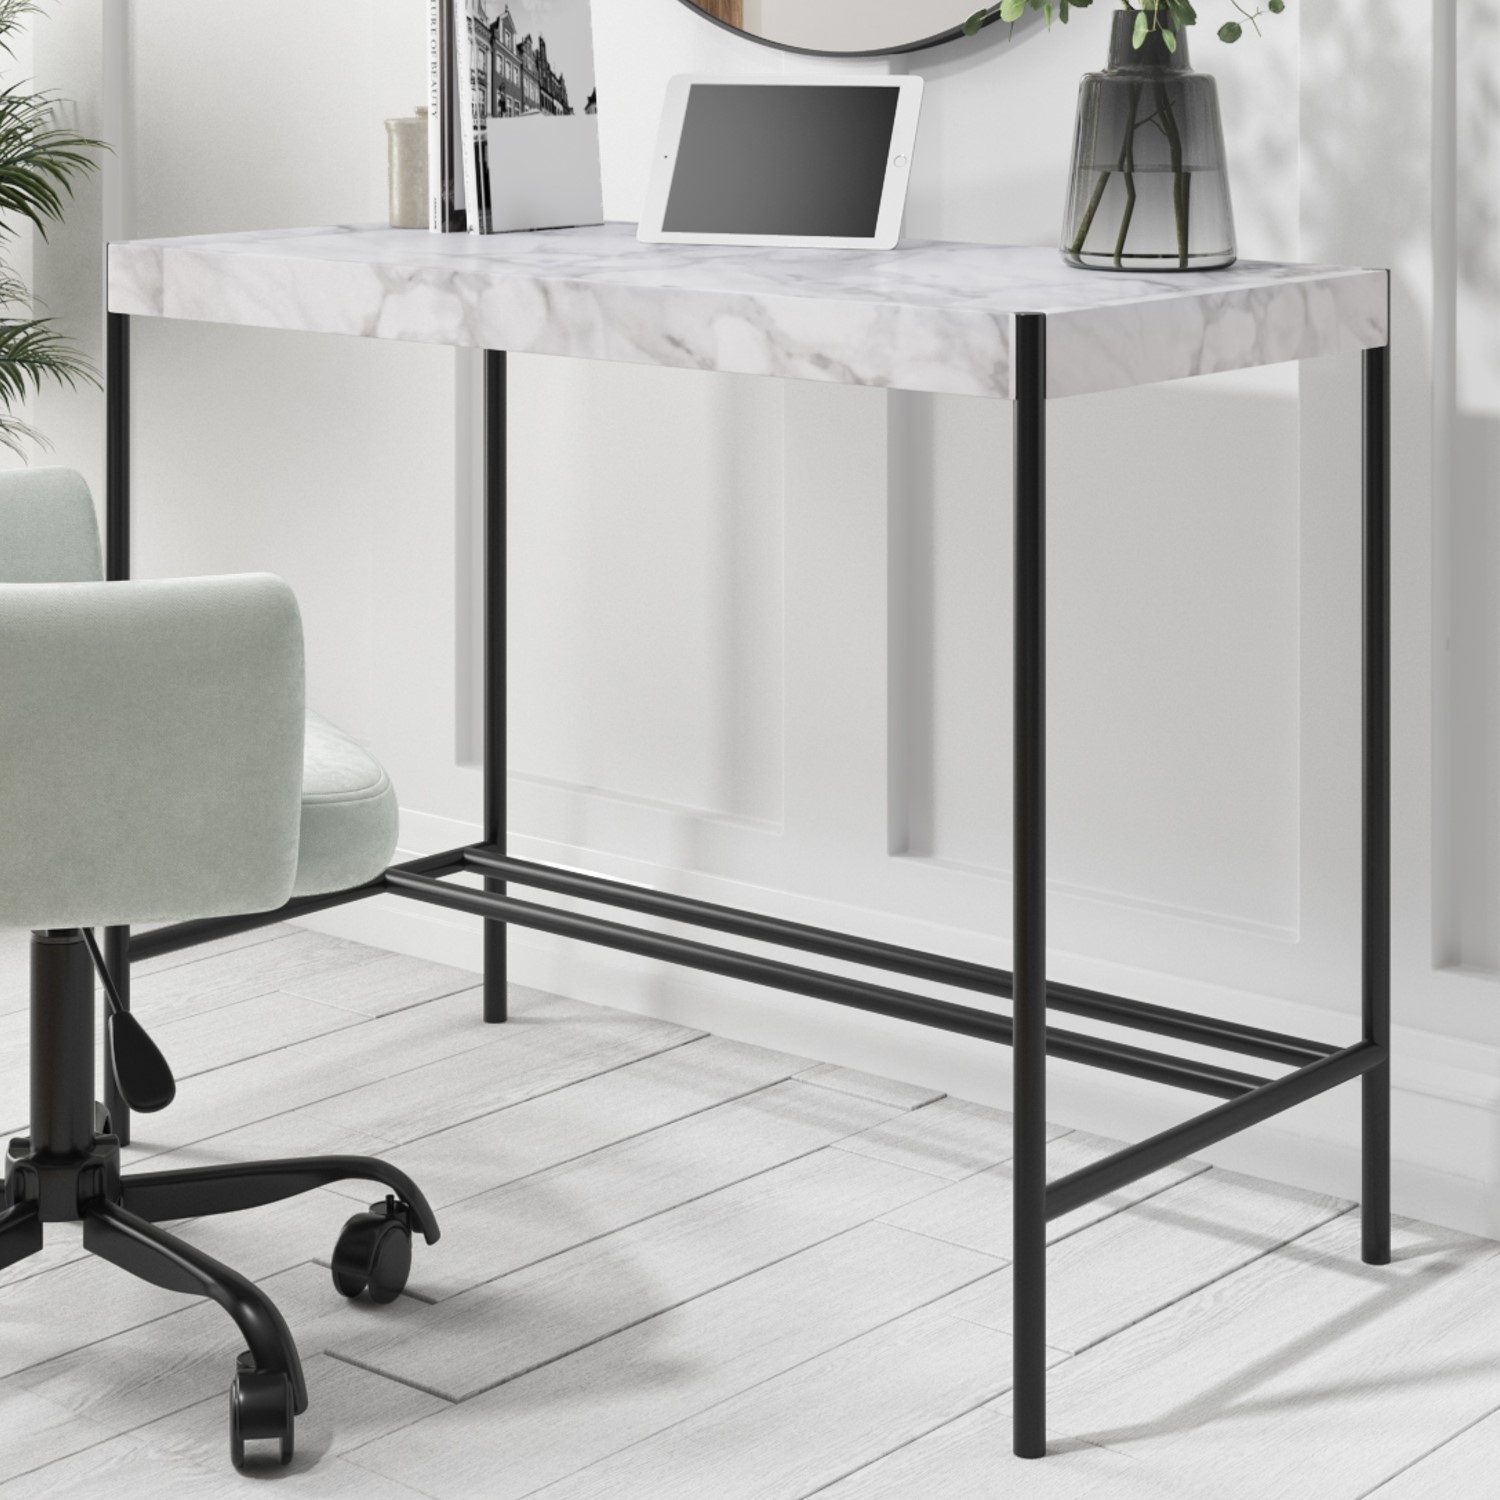 Read more about White marble & black velvet office desk and chair set roxy